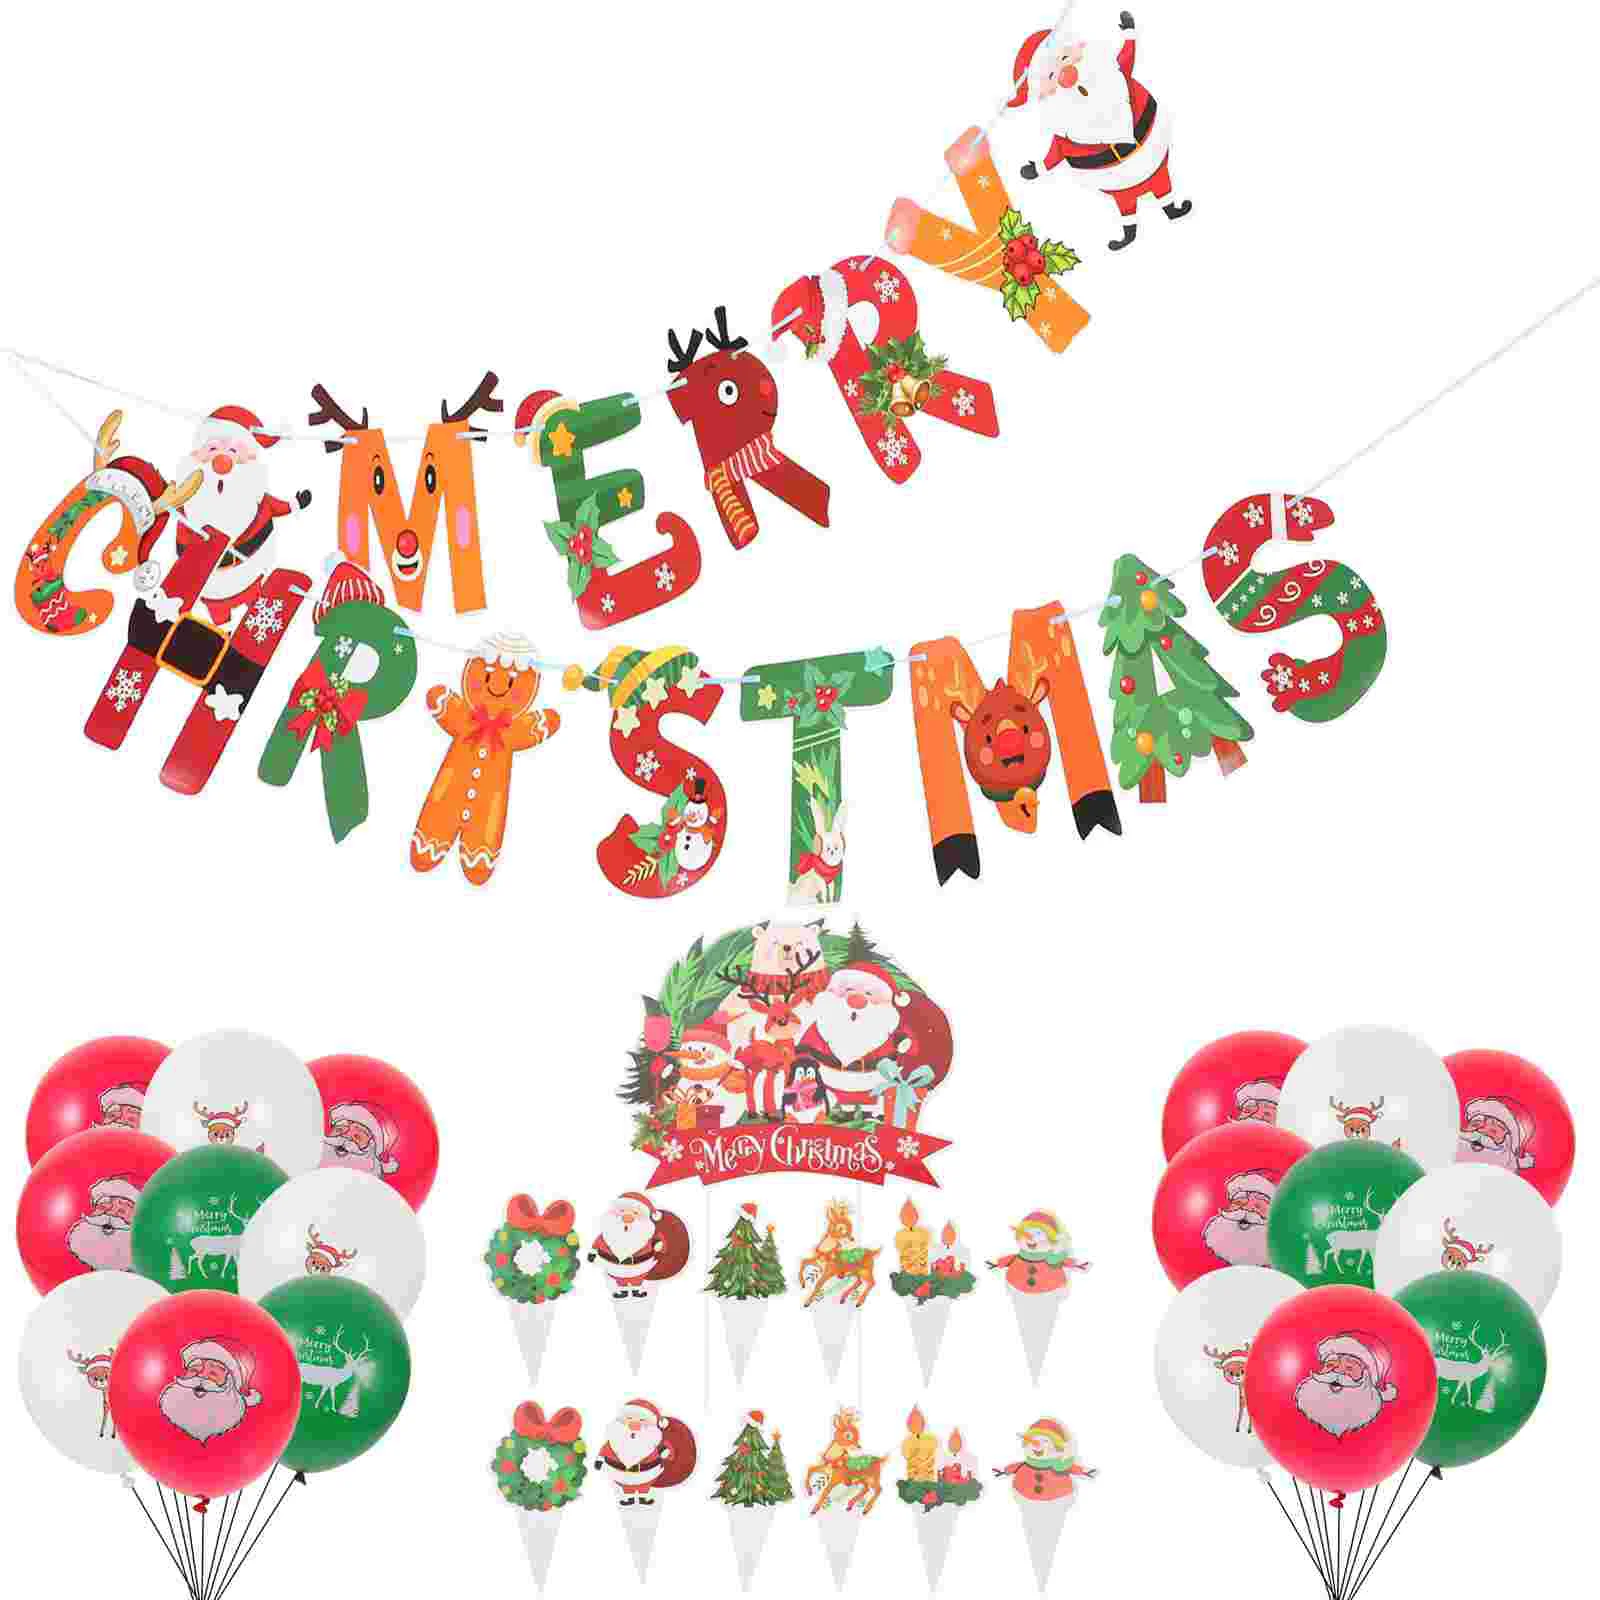 

1 Set of Christmas Party Supplies Christmas Party Balloon Decors Cake Decorations Hanging Banners